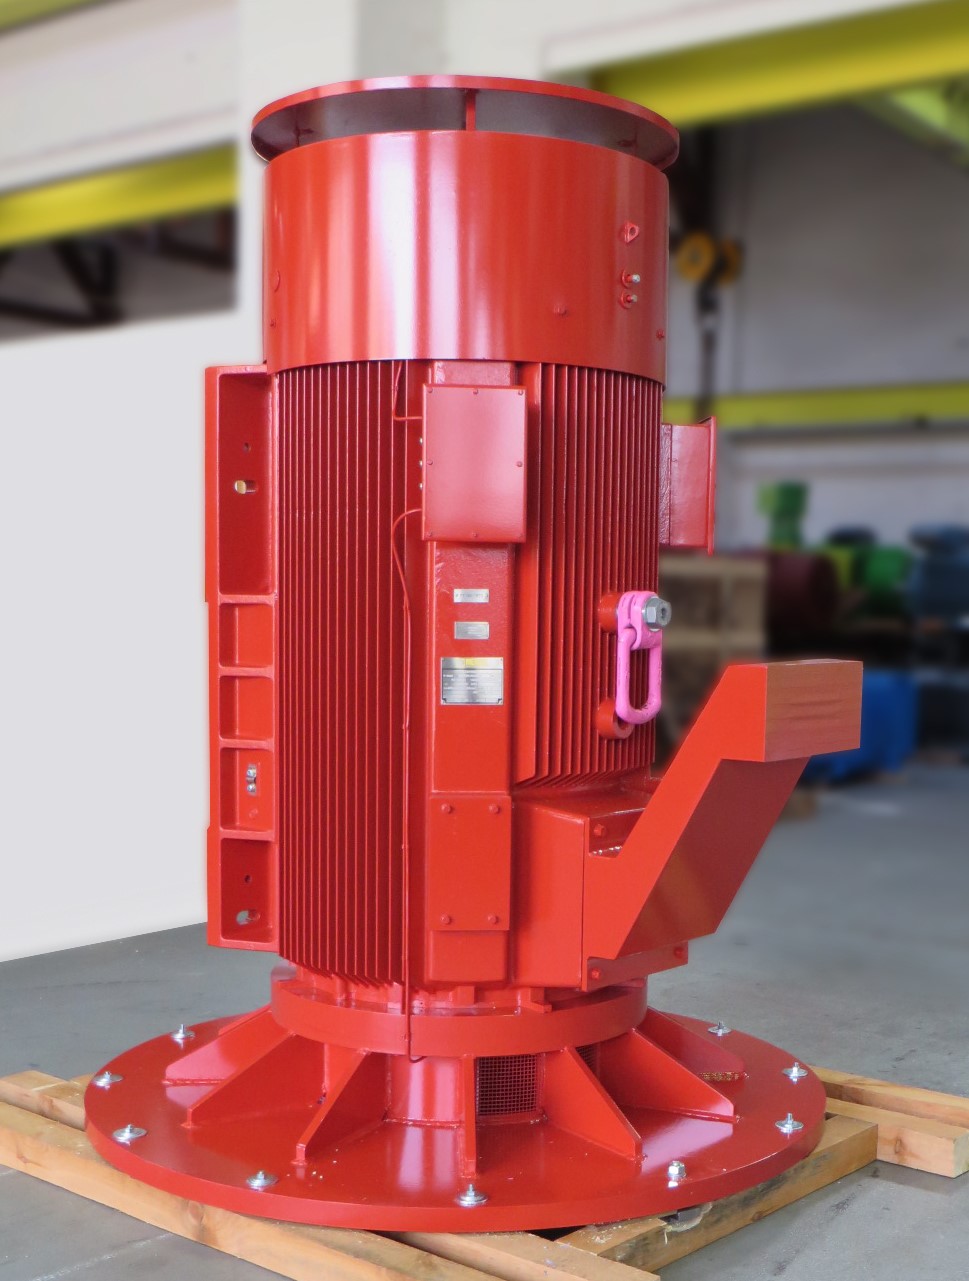 Special squirrel cage motor for pump drive application